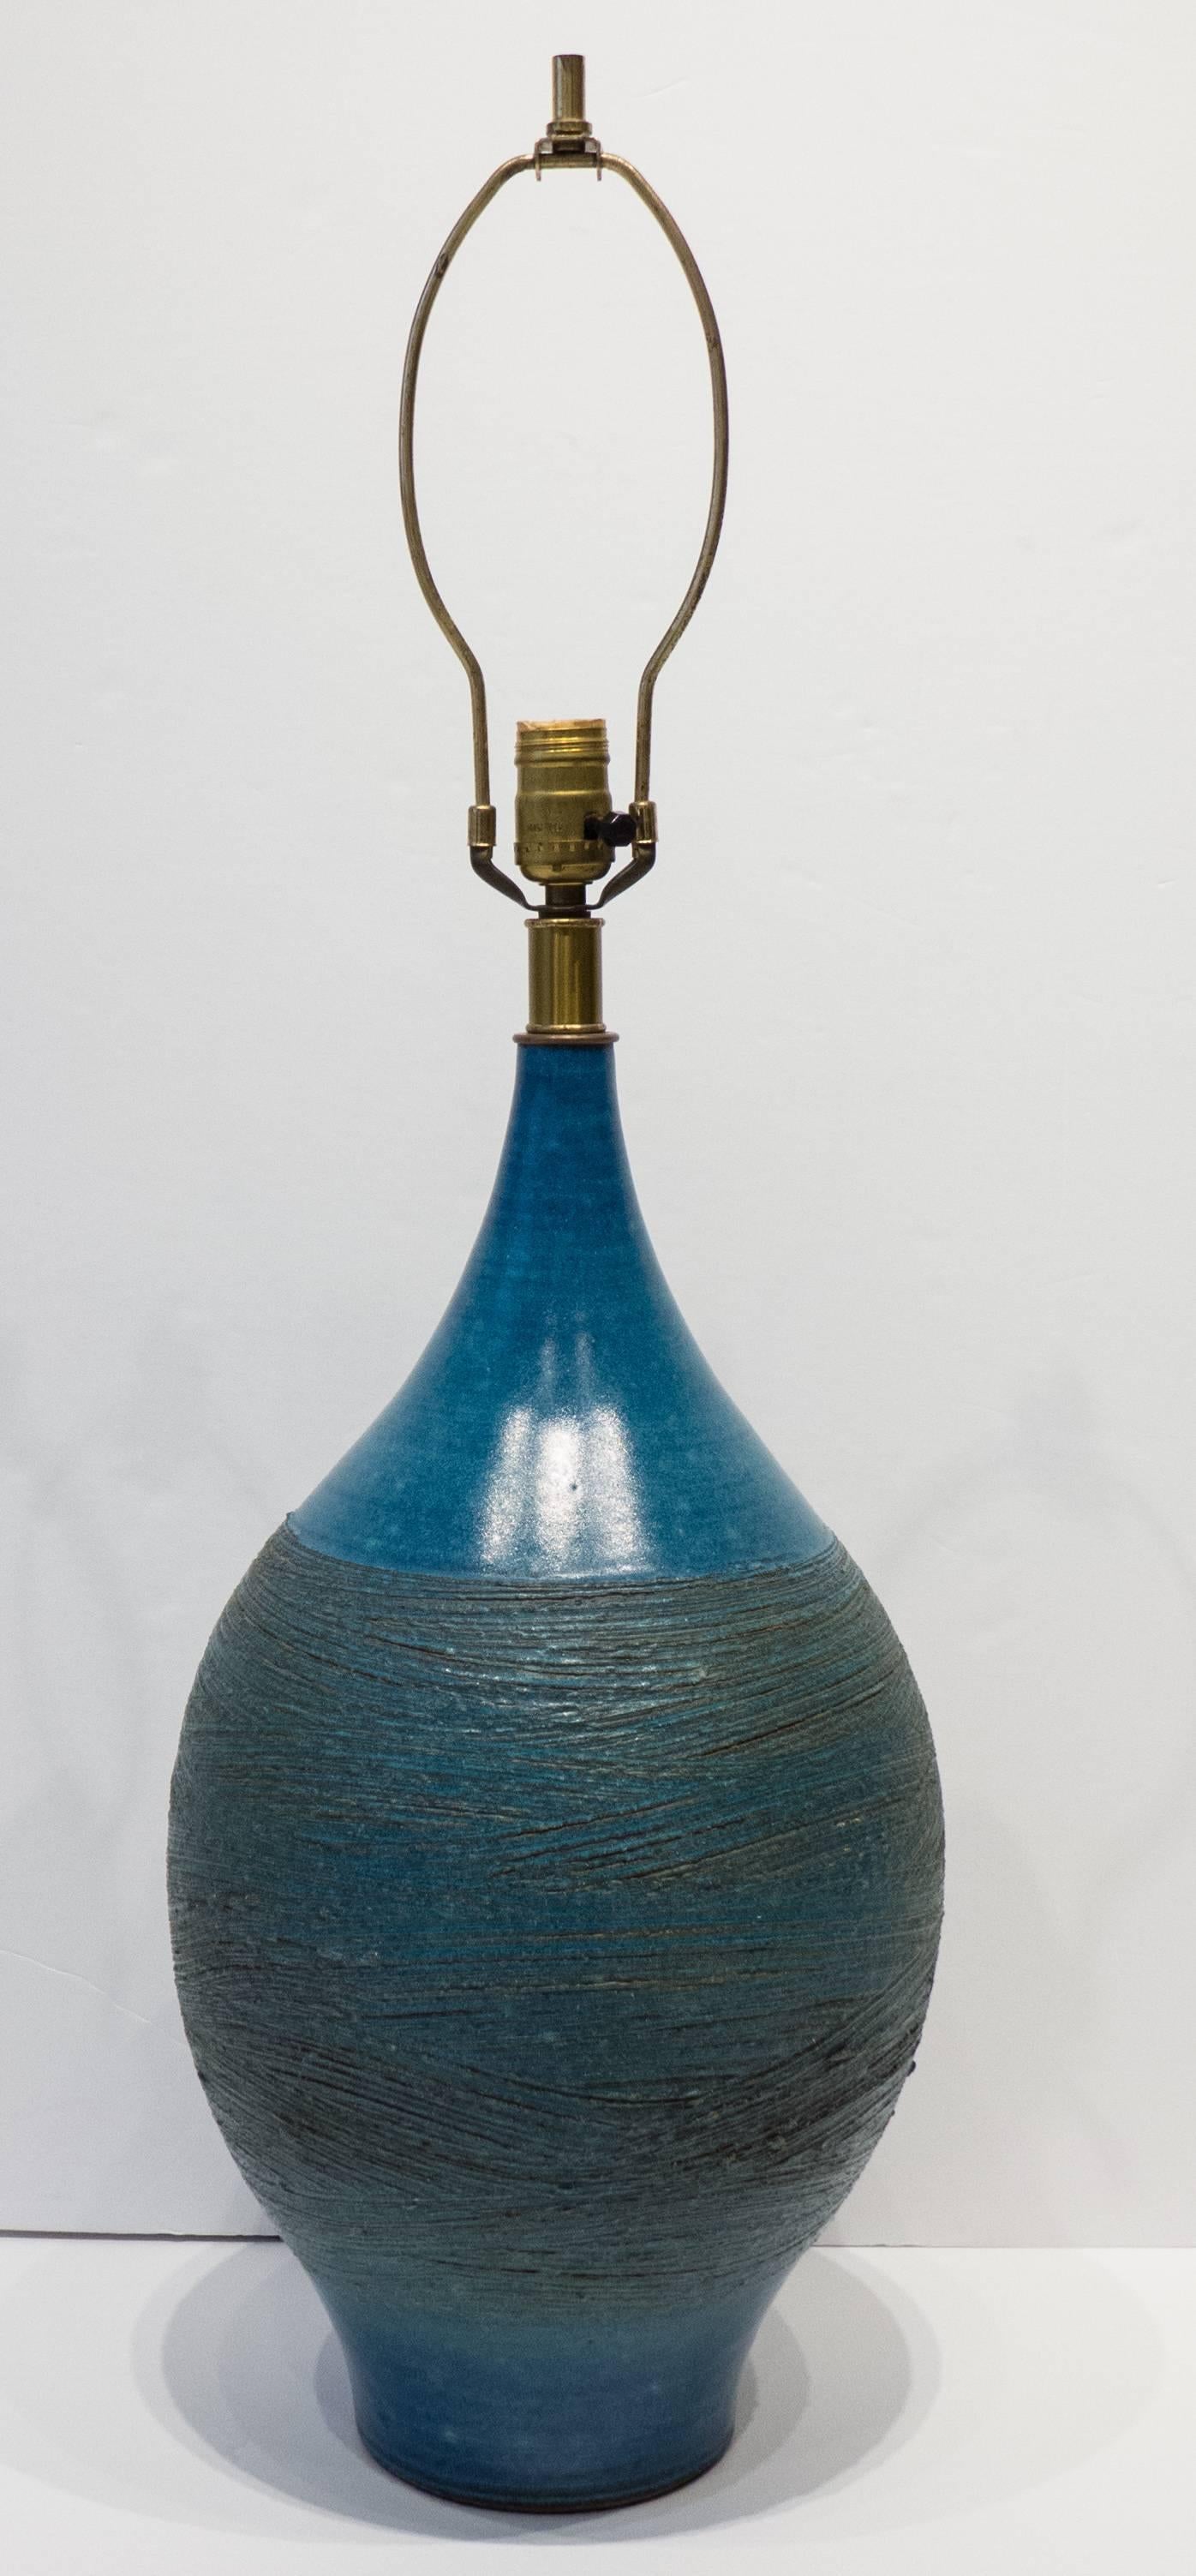 Handthrown bulbous stoneware lamp with a semi-gloss Persian blue glaze framing a textured mid-section. From the 3300 series designed by Lee Rosen and produced by Design Technics, circa 1950s. From the brochure: 